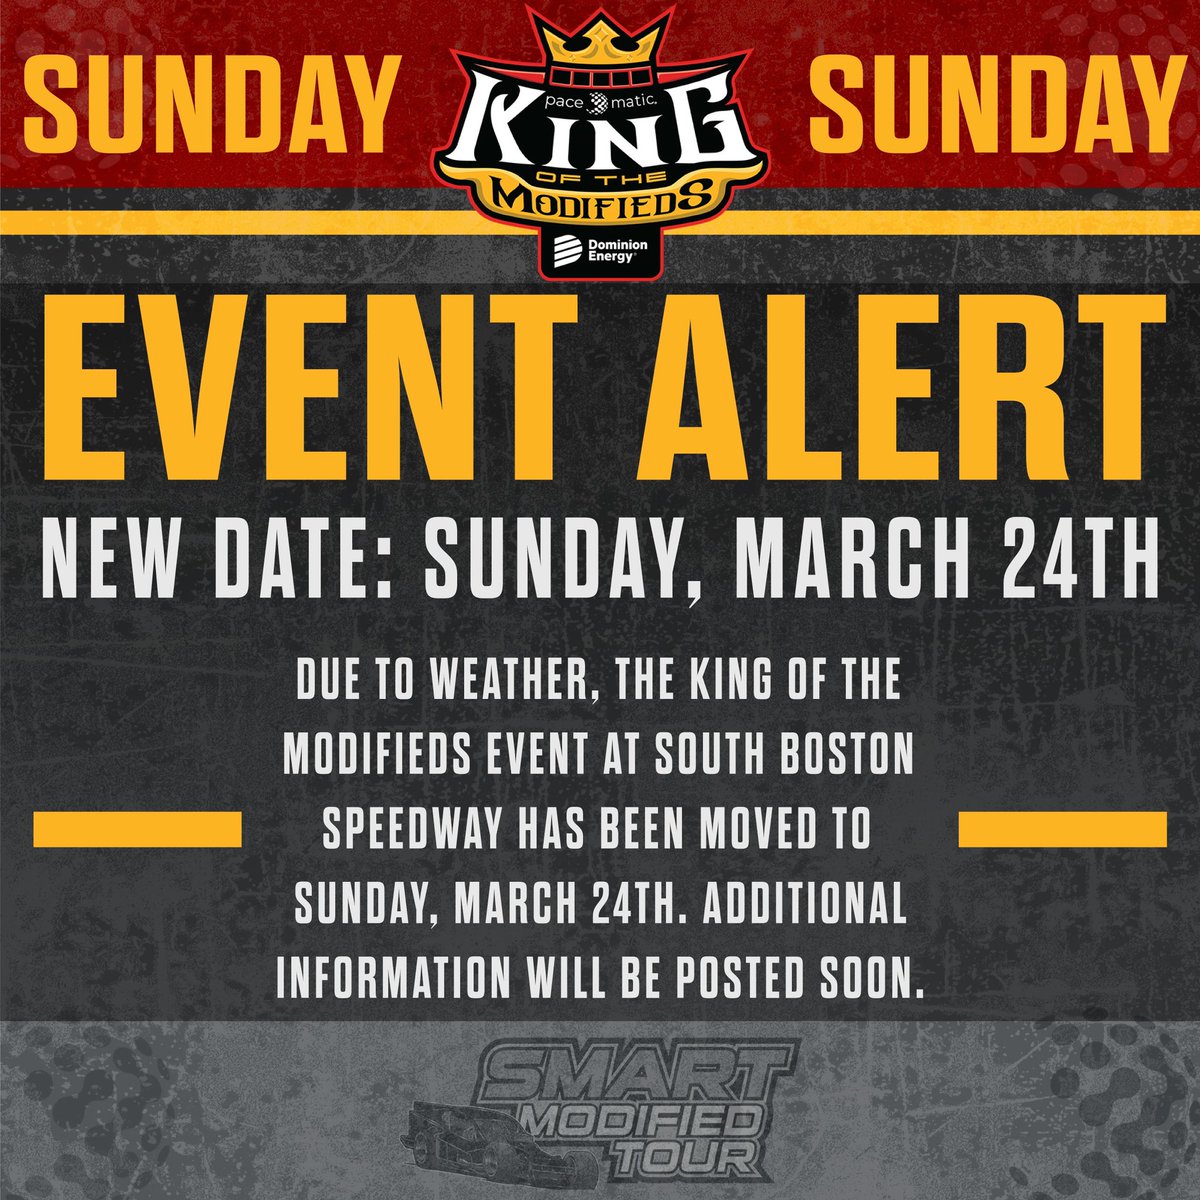 🚨EVENT ALERT🚨 Due to weather, the King of the Modifieds event at @SoBoSpeedway57 has been moved to SUNDAY, March 24th. A full schedule will be posted soon.